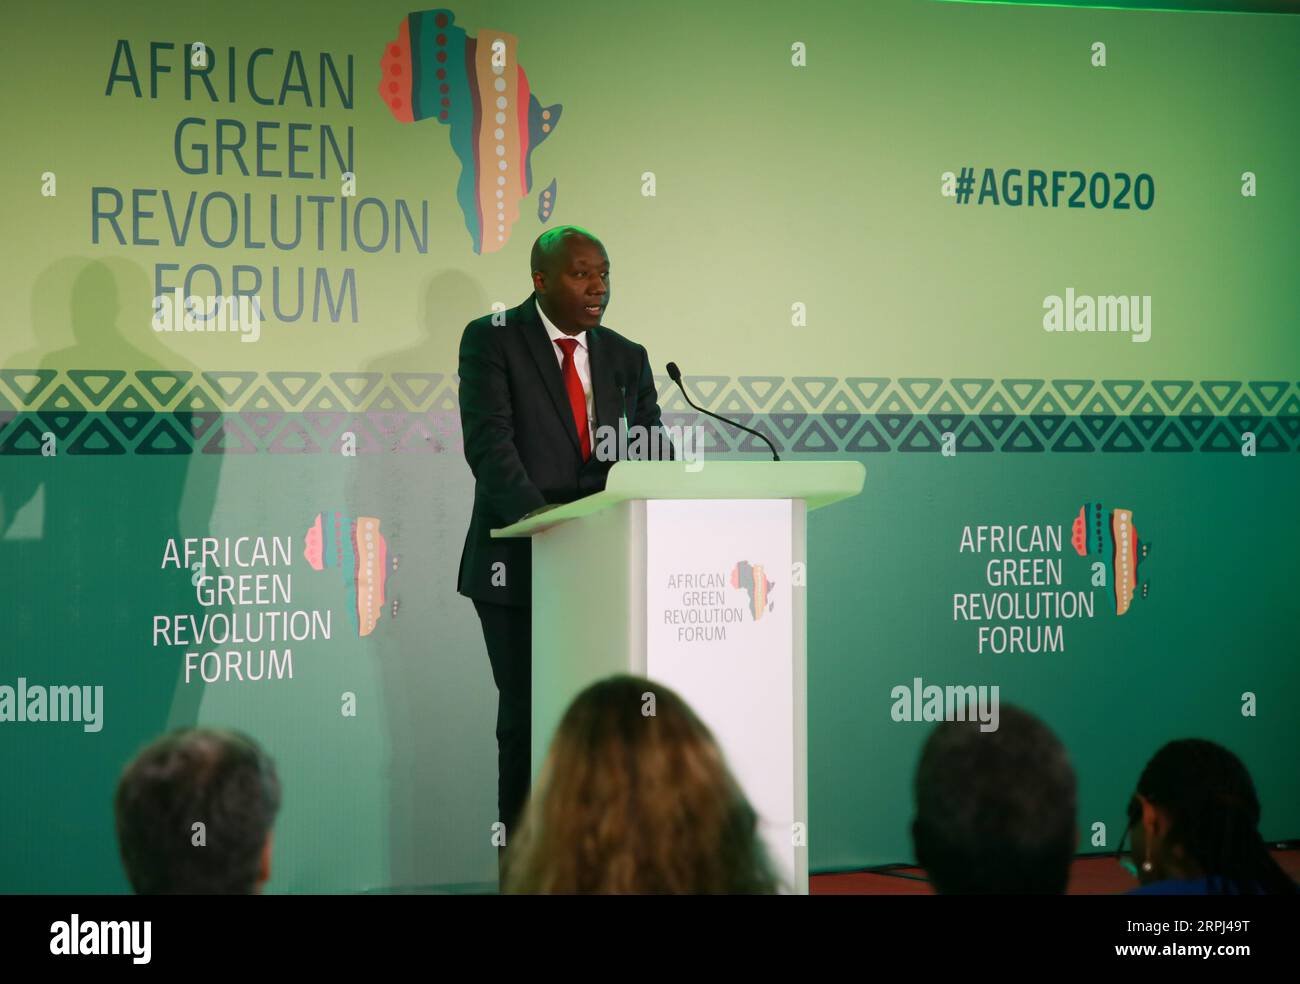 191126 -- KIGALI, Nov. 26, 2019 -- Rwandan Prime Minister Edouard Ngirente delivers remarks at an event to launch the African Green Revolution Forum AGRF 2020 Summit in Kigali, capital city of Rwanda, Nov. 26, 2019. New apporaches were emphazized on Monday in Rwanda s Kigali to address rising cases of hunger and food insecurity challenges in Africa.  RWANDA-KIGALI-AGRF SUMMIT-FOOD INSECURITY CHALLENGES-LAUNCH EVENT LyuxTianran PUBLICATIONxNOTxINxCHN Stock Photo